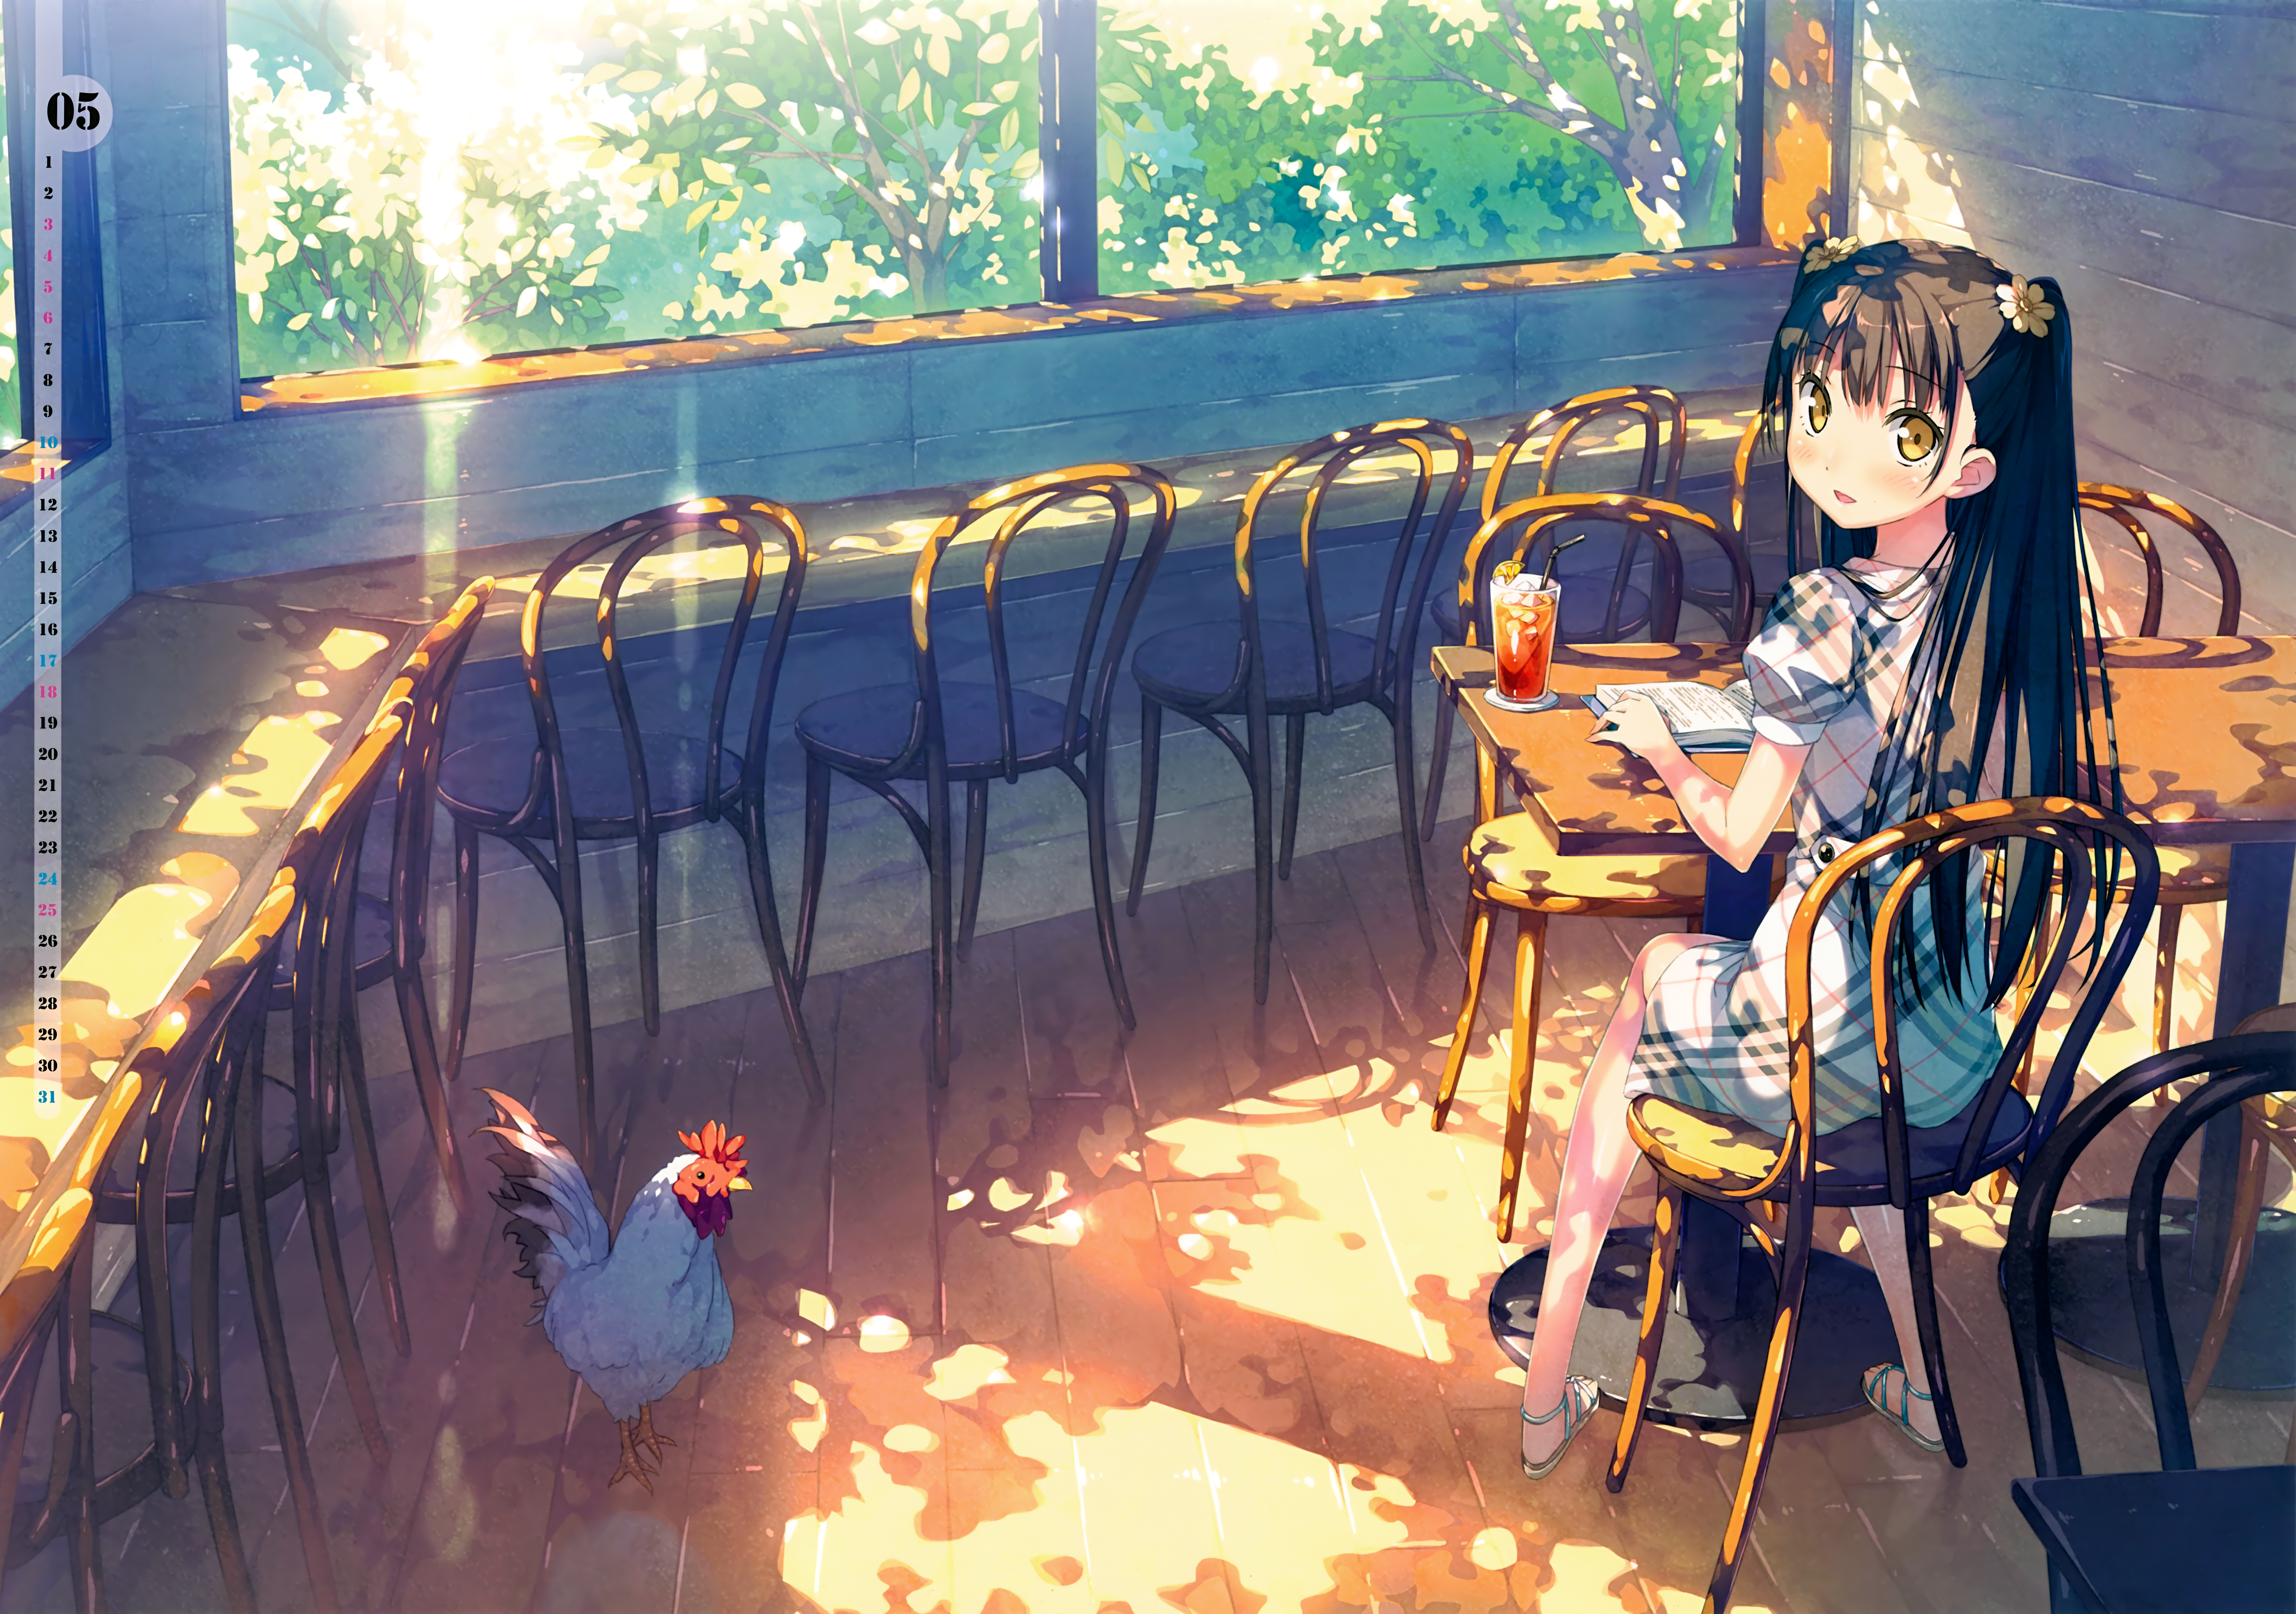 Morning Cafe Reading by カントク